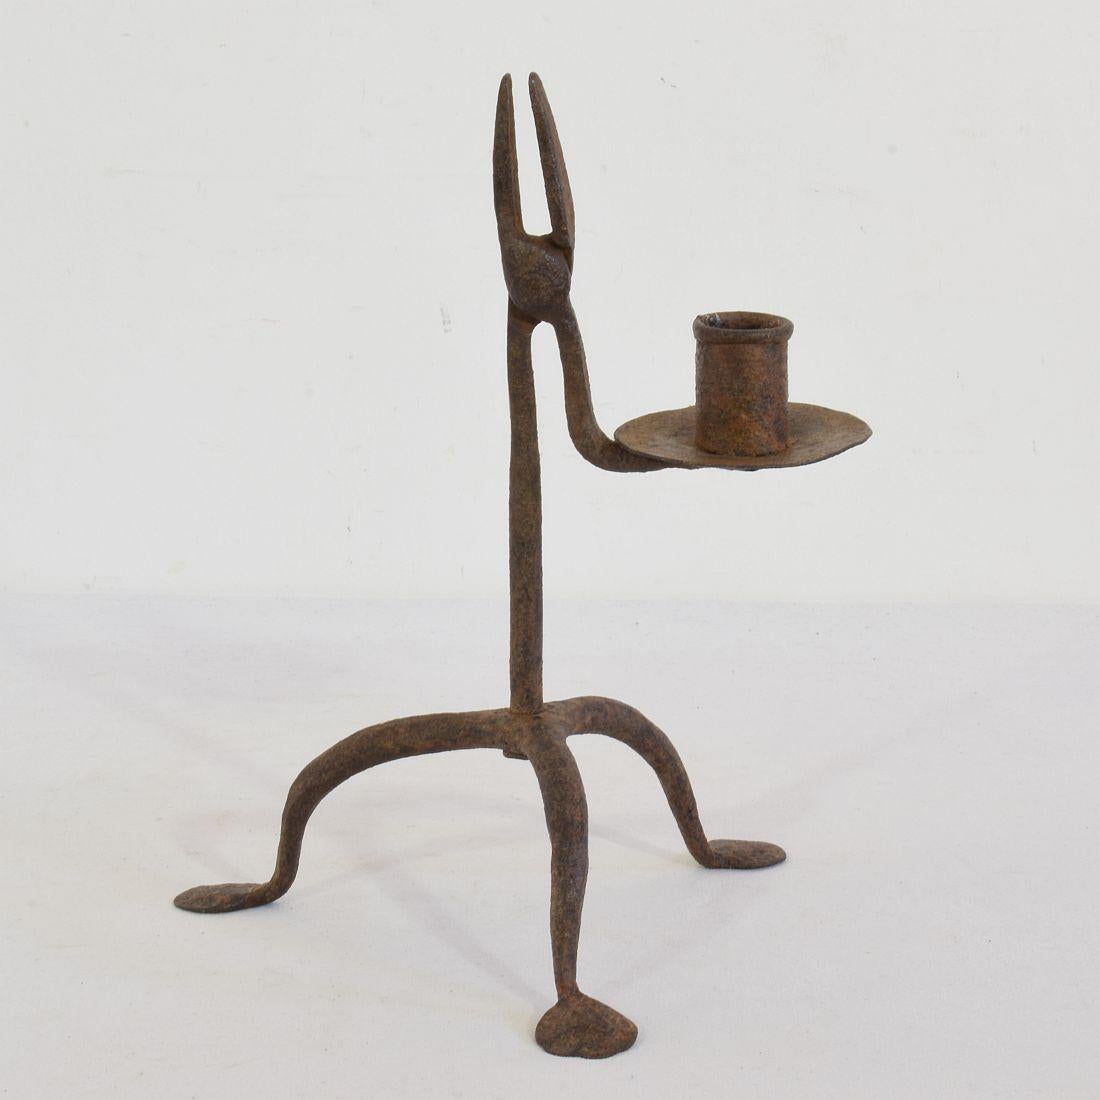 Rustic 18th-19th Century Hand Forged Iron Candleholder